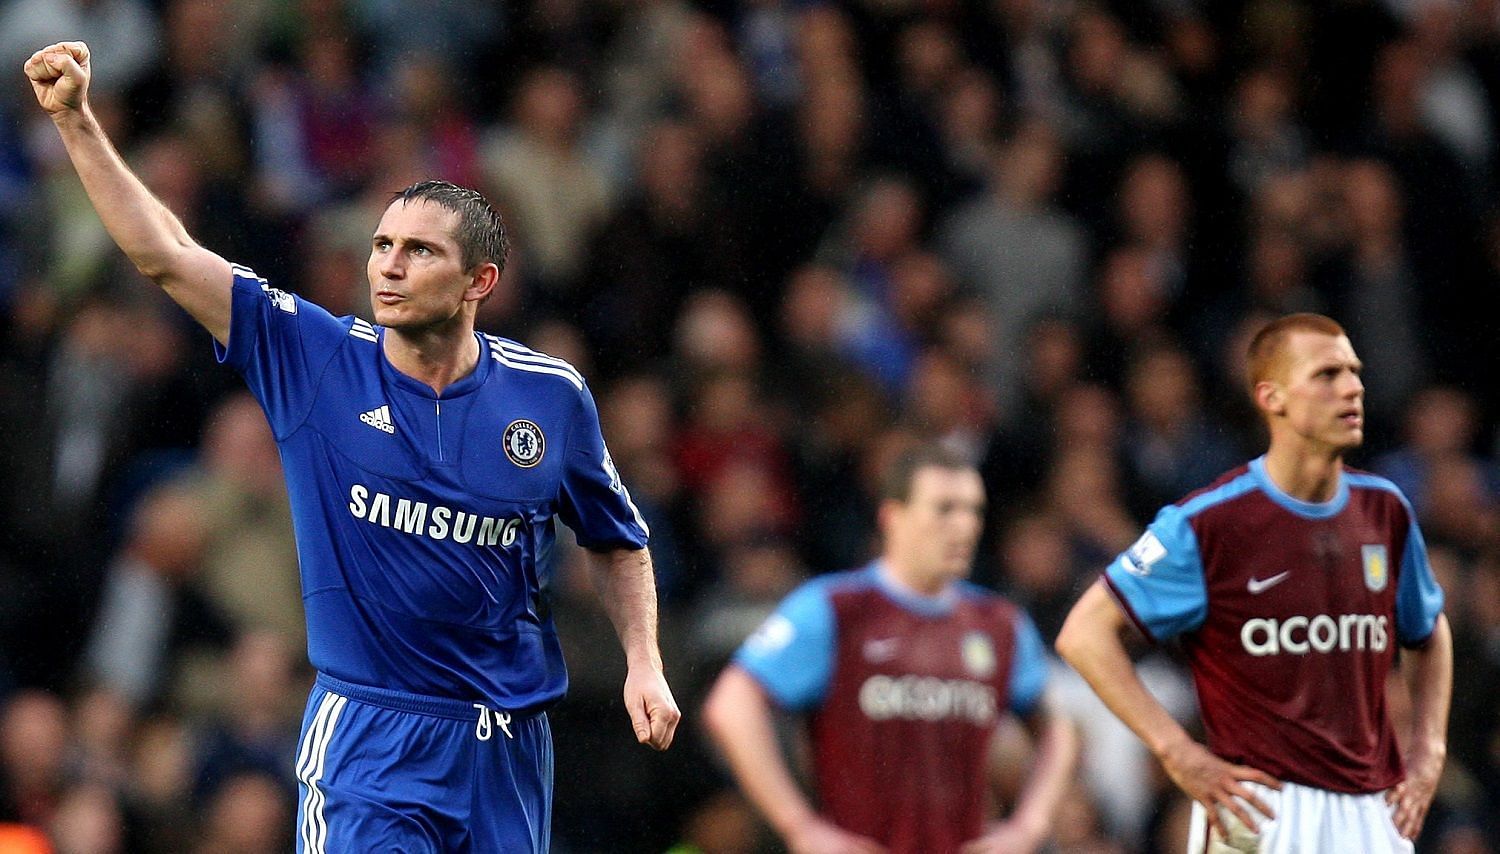 Frank Lampard surpassed the 150-goal mark in this match with a sublime quadruple.